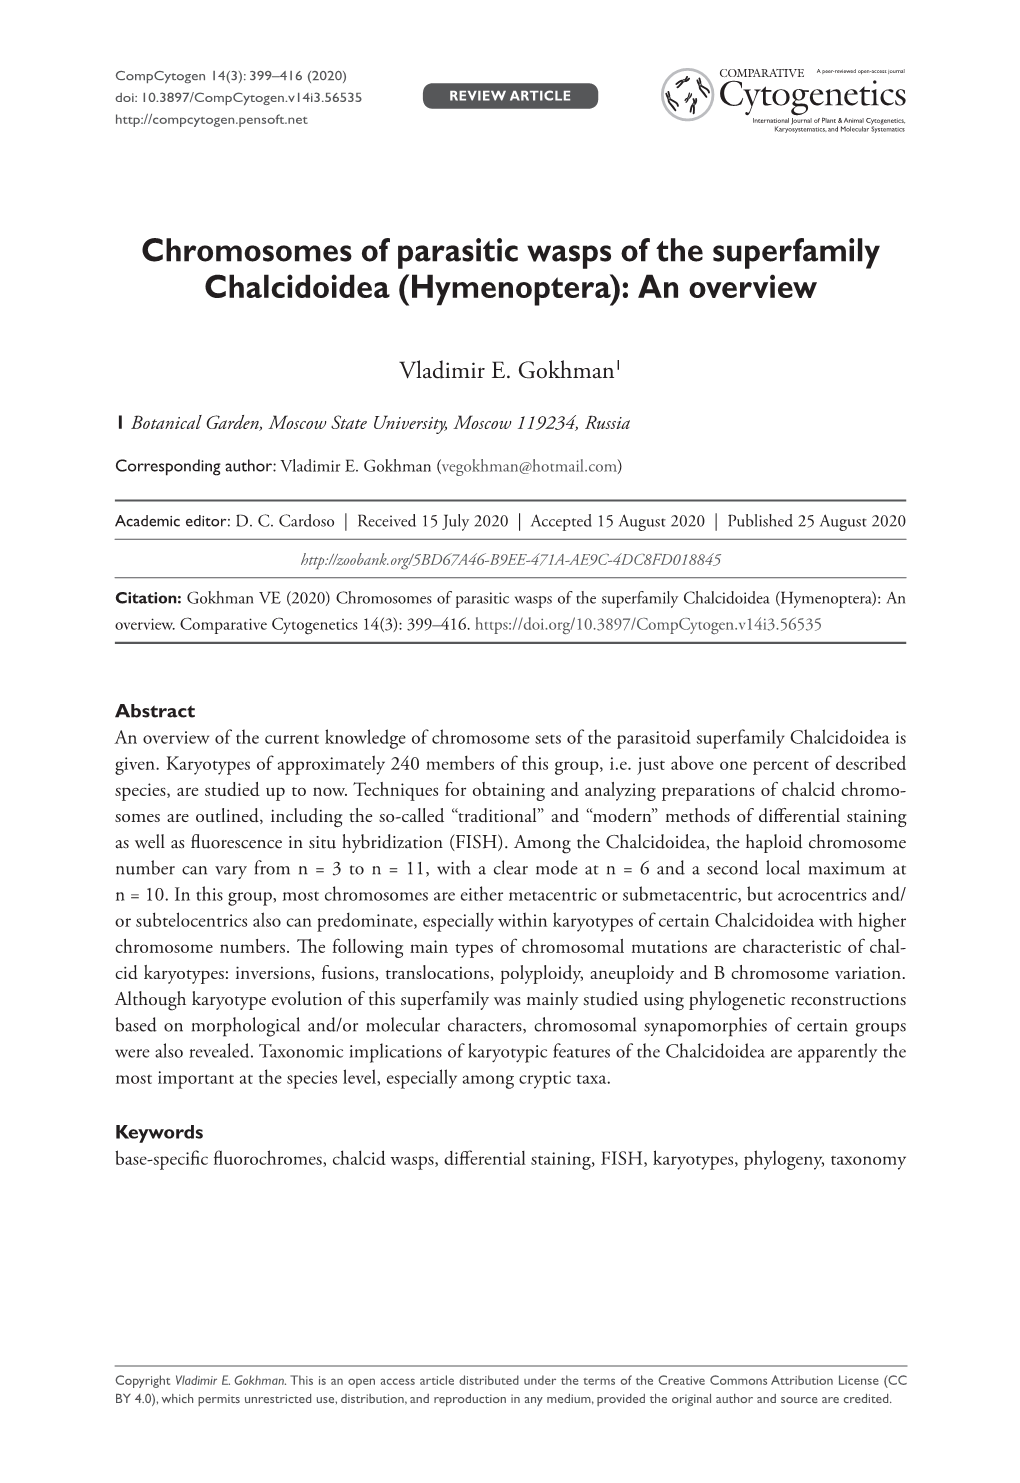 Chromosomes of Parasitic Wasps of the Superfamily Chalcidoidea (Hymenoptera): an Overview